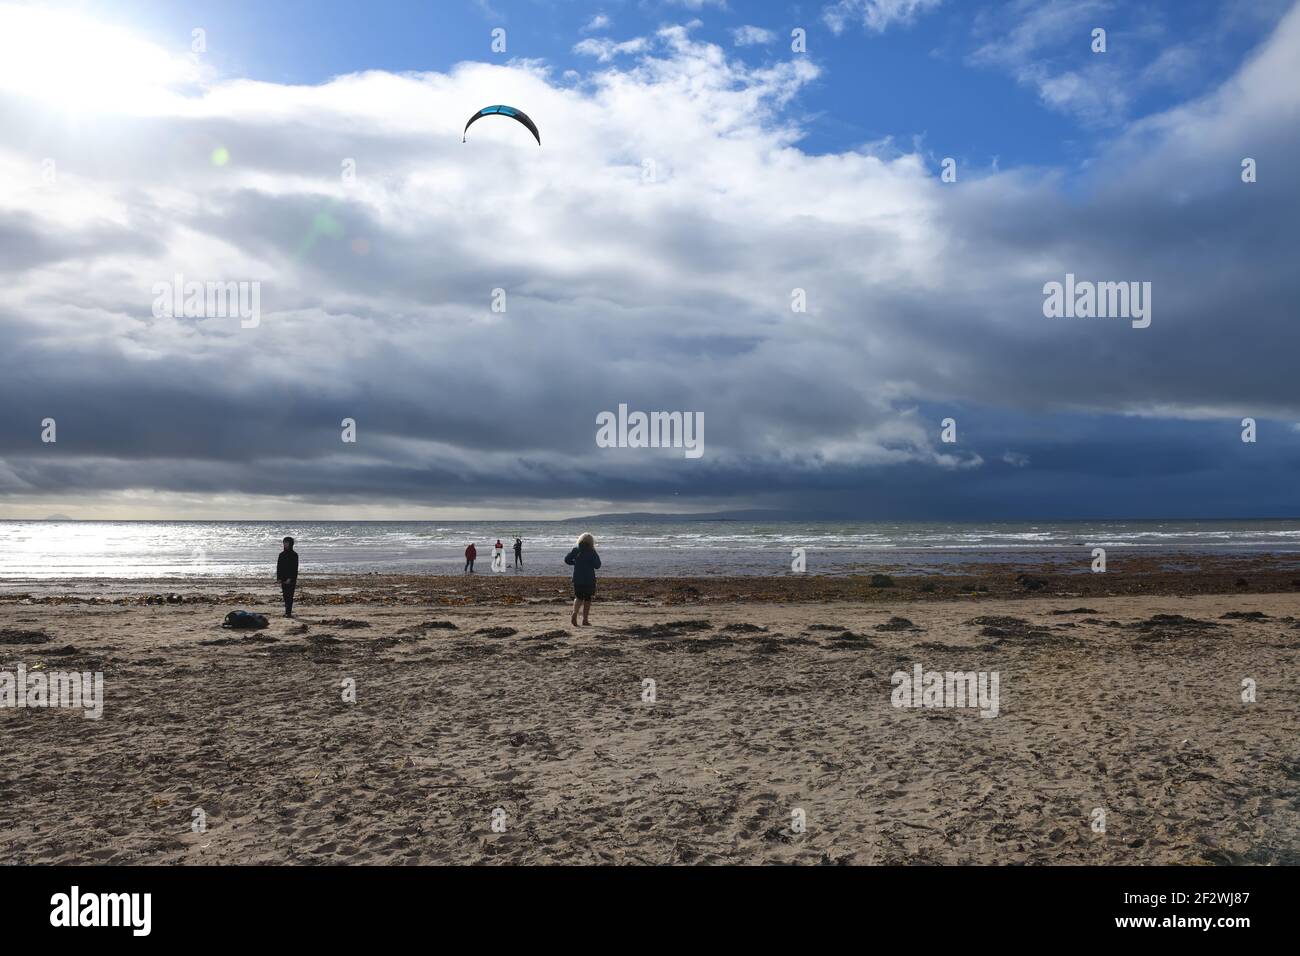 Troon, Ayrshire, Scotland, UK. 13th, March, 2021. A kite surfer prepares to take advantage of a strong on shore winds at Troon beach as dark rain clouds move quickly overhead. Credit. Alamy Live News/ Douglas Carr Stock Photo